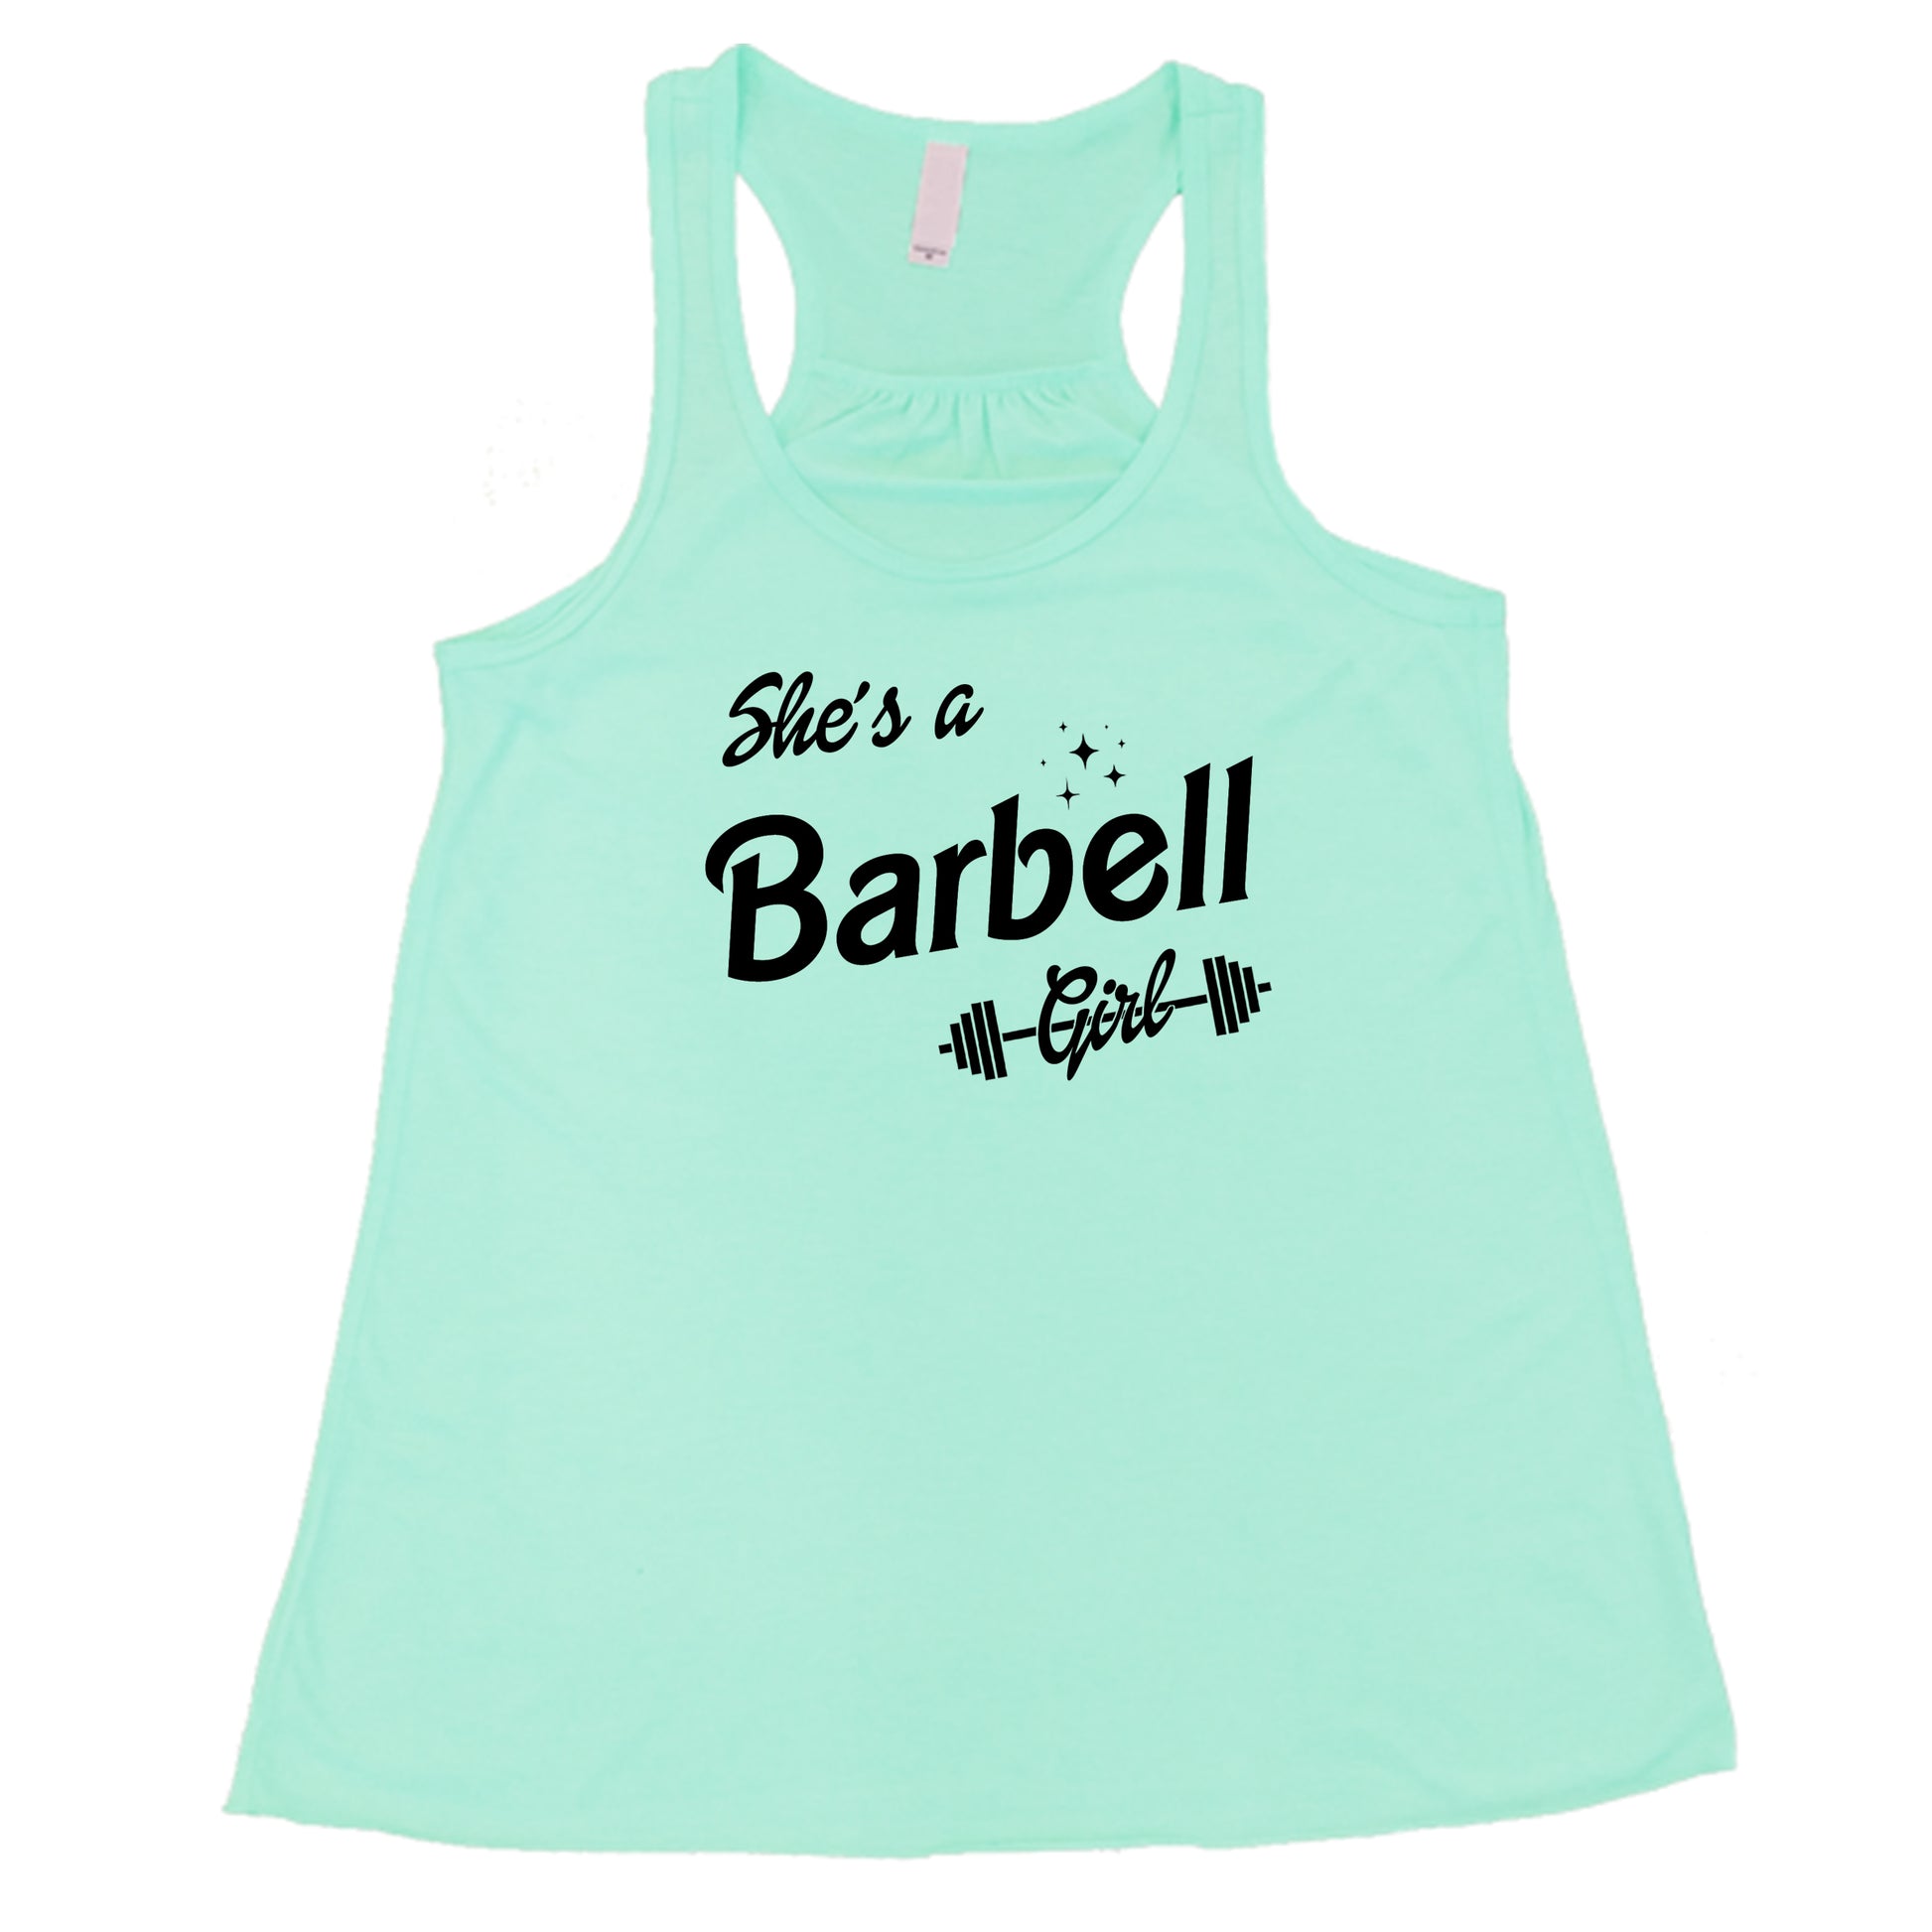 mint colored "she's a barbell girl" tank top